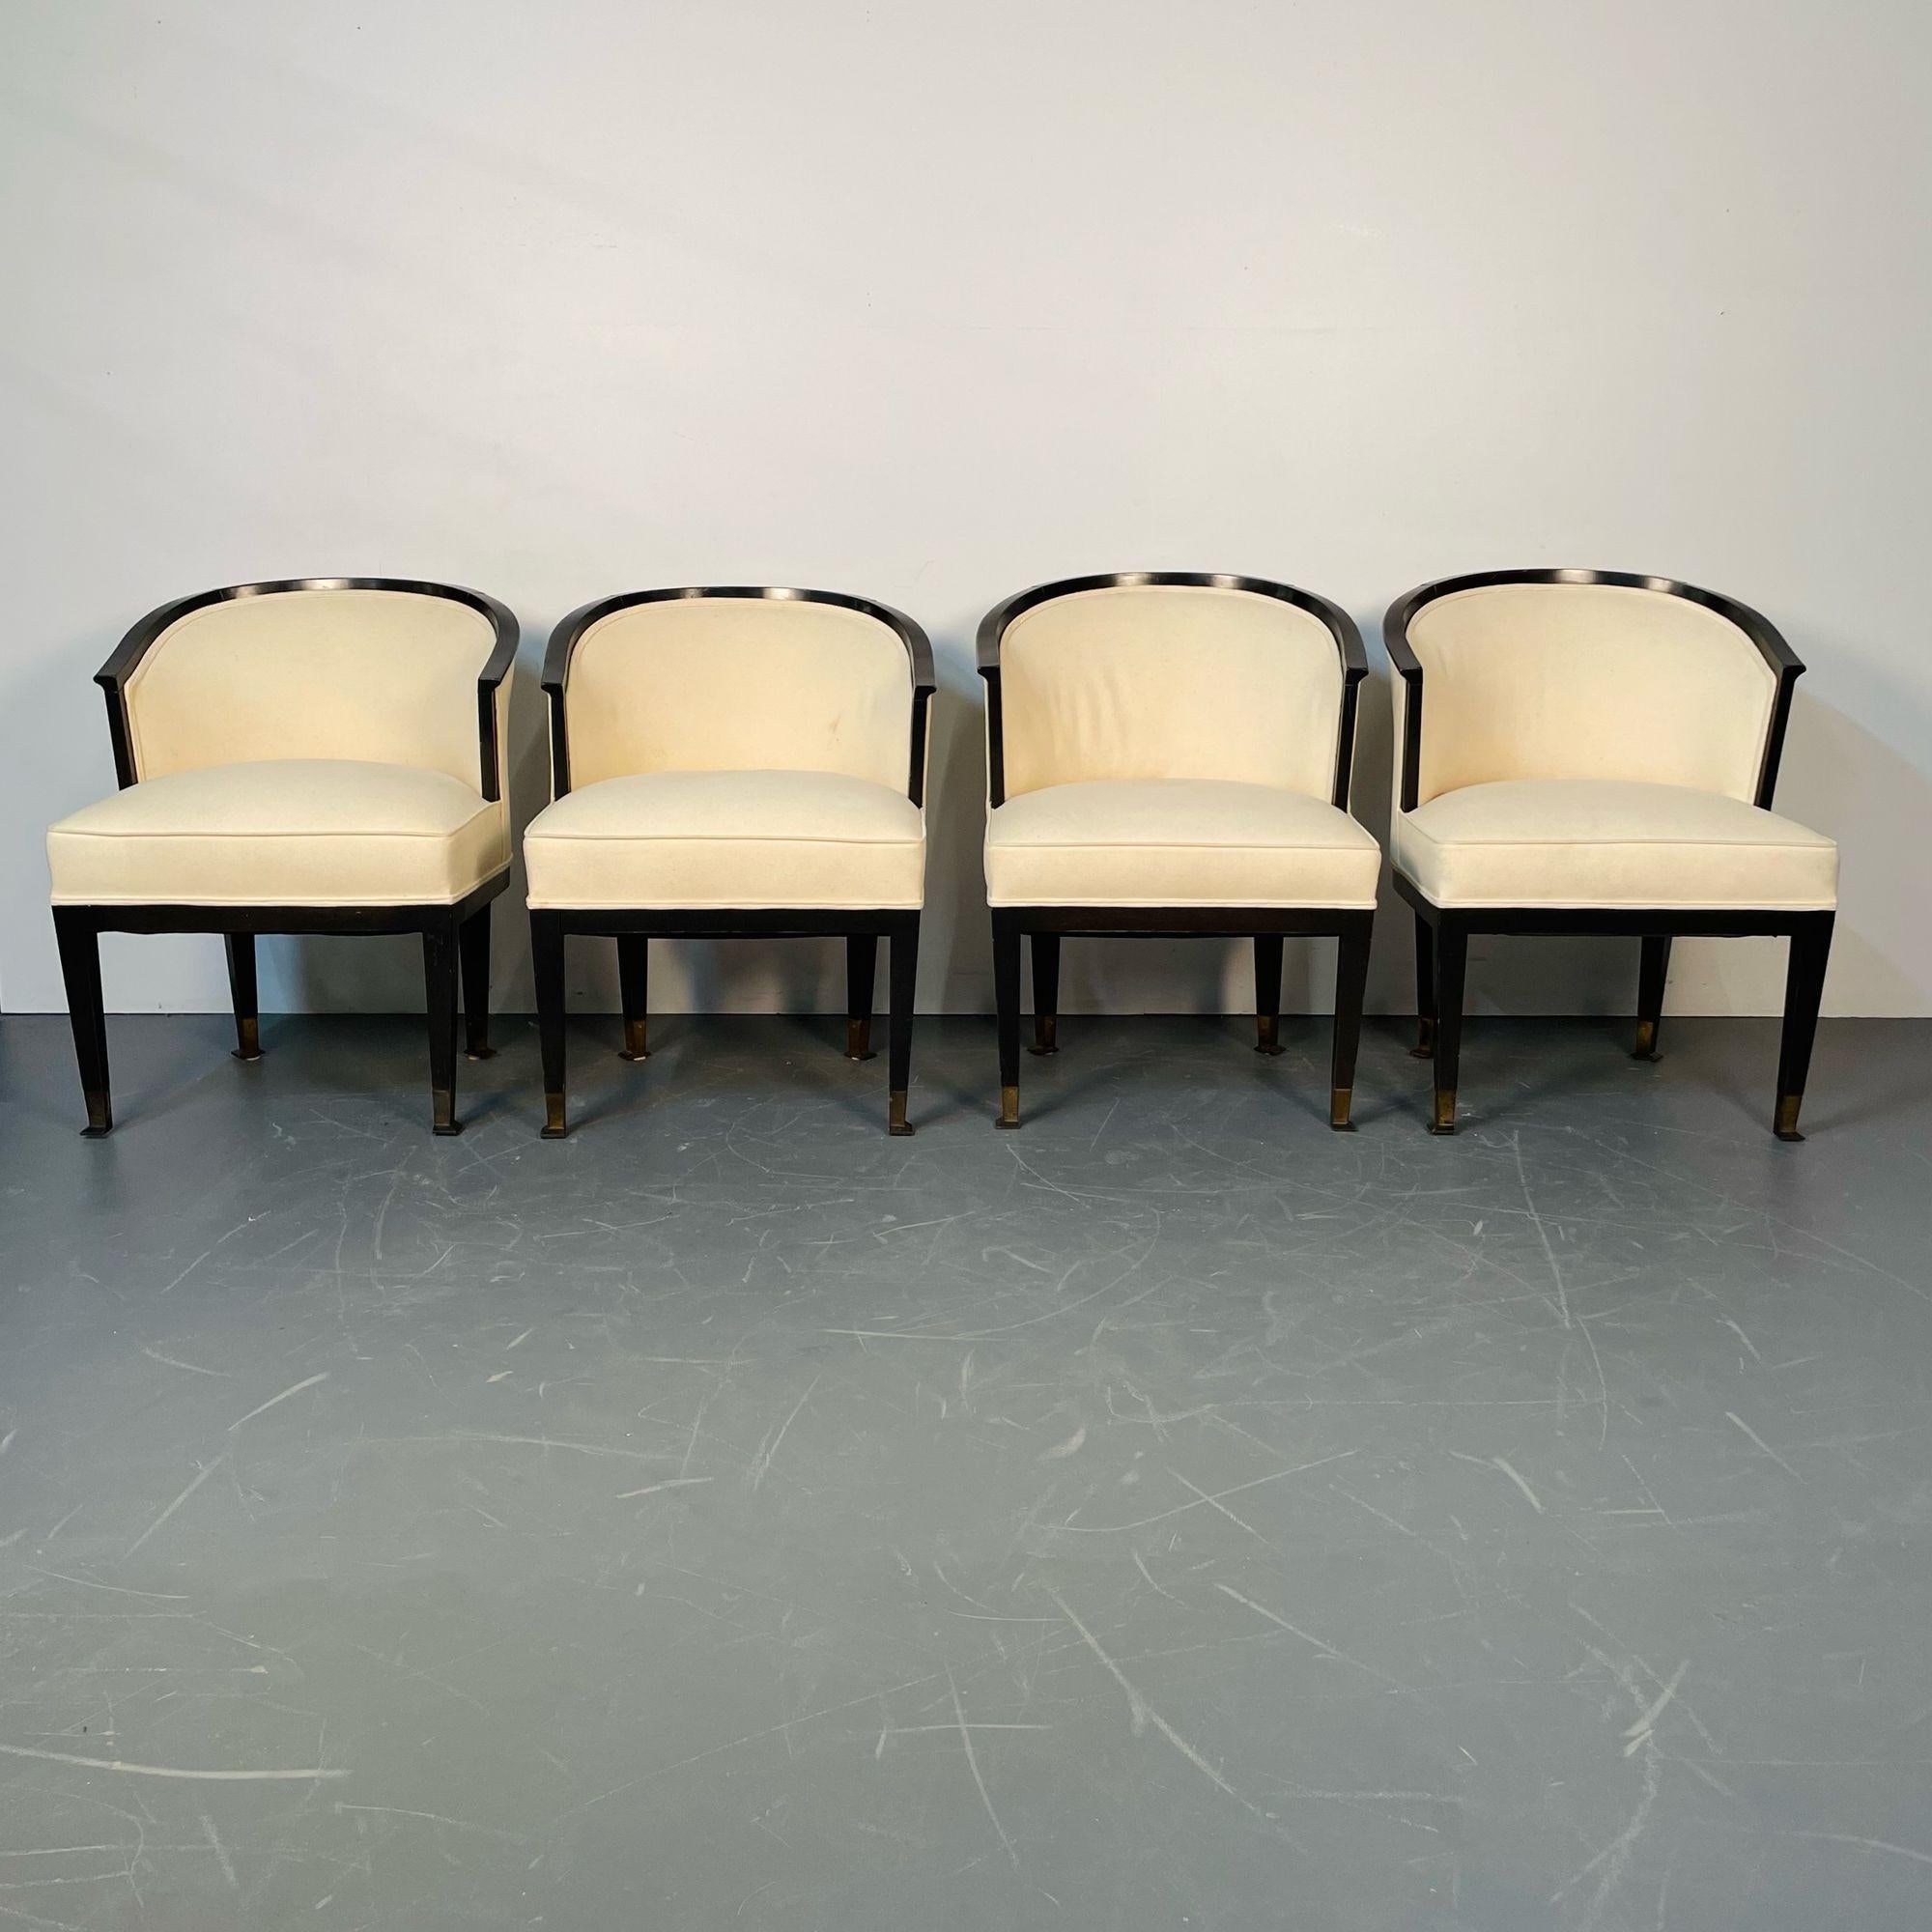 Mid-20th Century Set of Four French Art Deco Barrel Back Club Chairs / Bergeres, Ruhlman Style For Sale